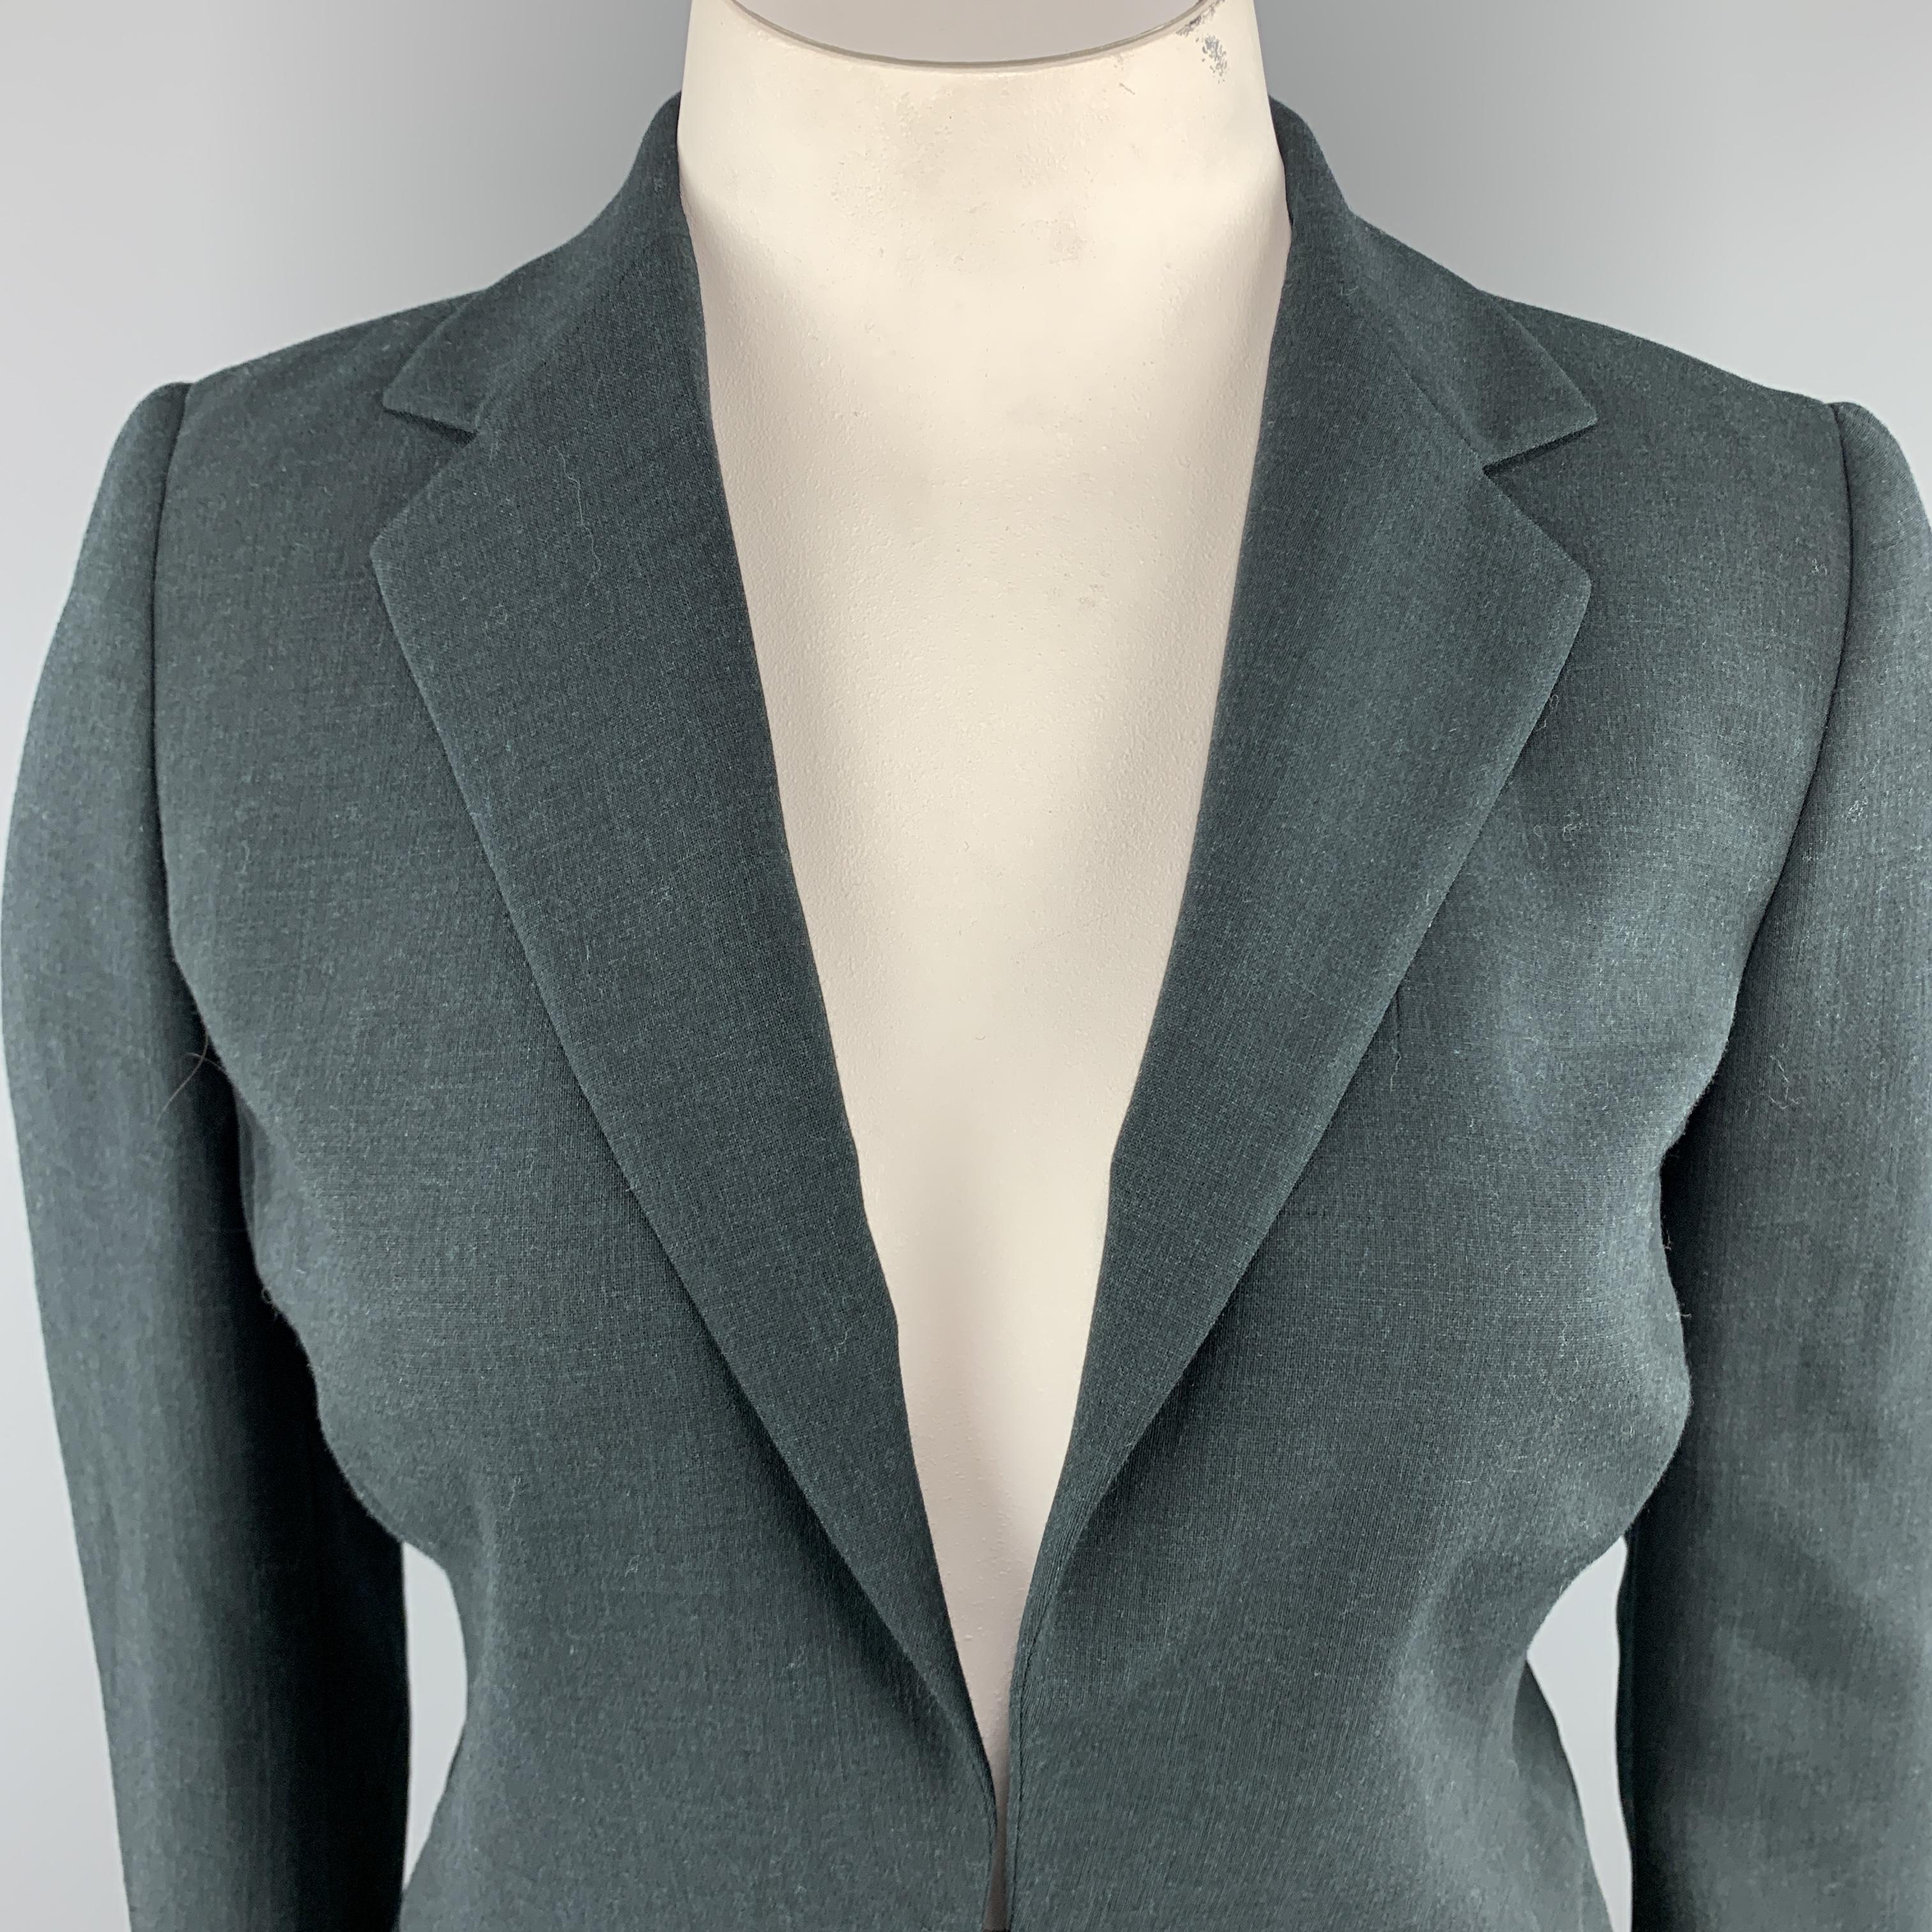 AKRIS blazer comes in forest green wool fabric and features a classic notch lapel, double hook eye closure, and detachable zip off panel with faux flap pockets. Made in Switzerland.

Excellent Pre-Owned Condition.
Marked: US